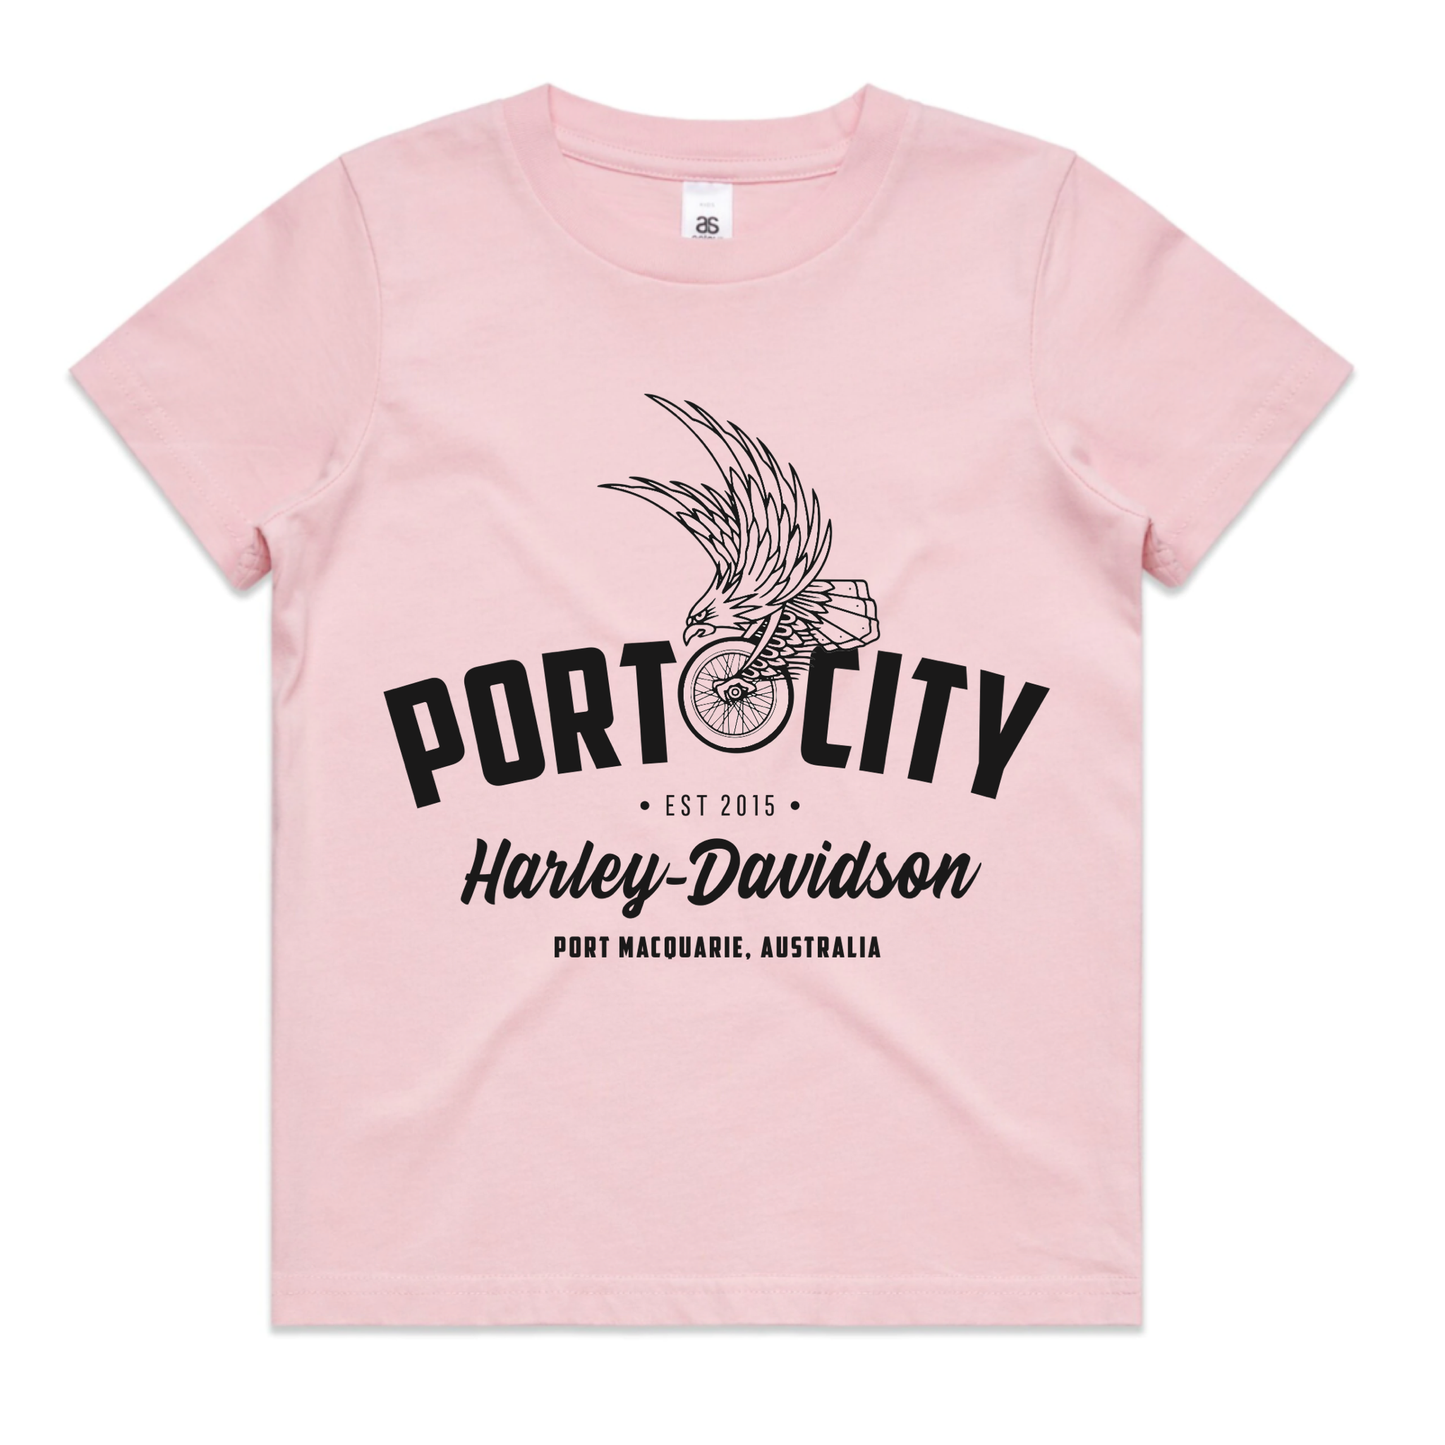 Kids / Youth Port City Harley-Davidson Eagle Wing T-Shirt - Pink - Sizes 2-6 (NEW)